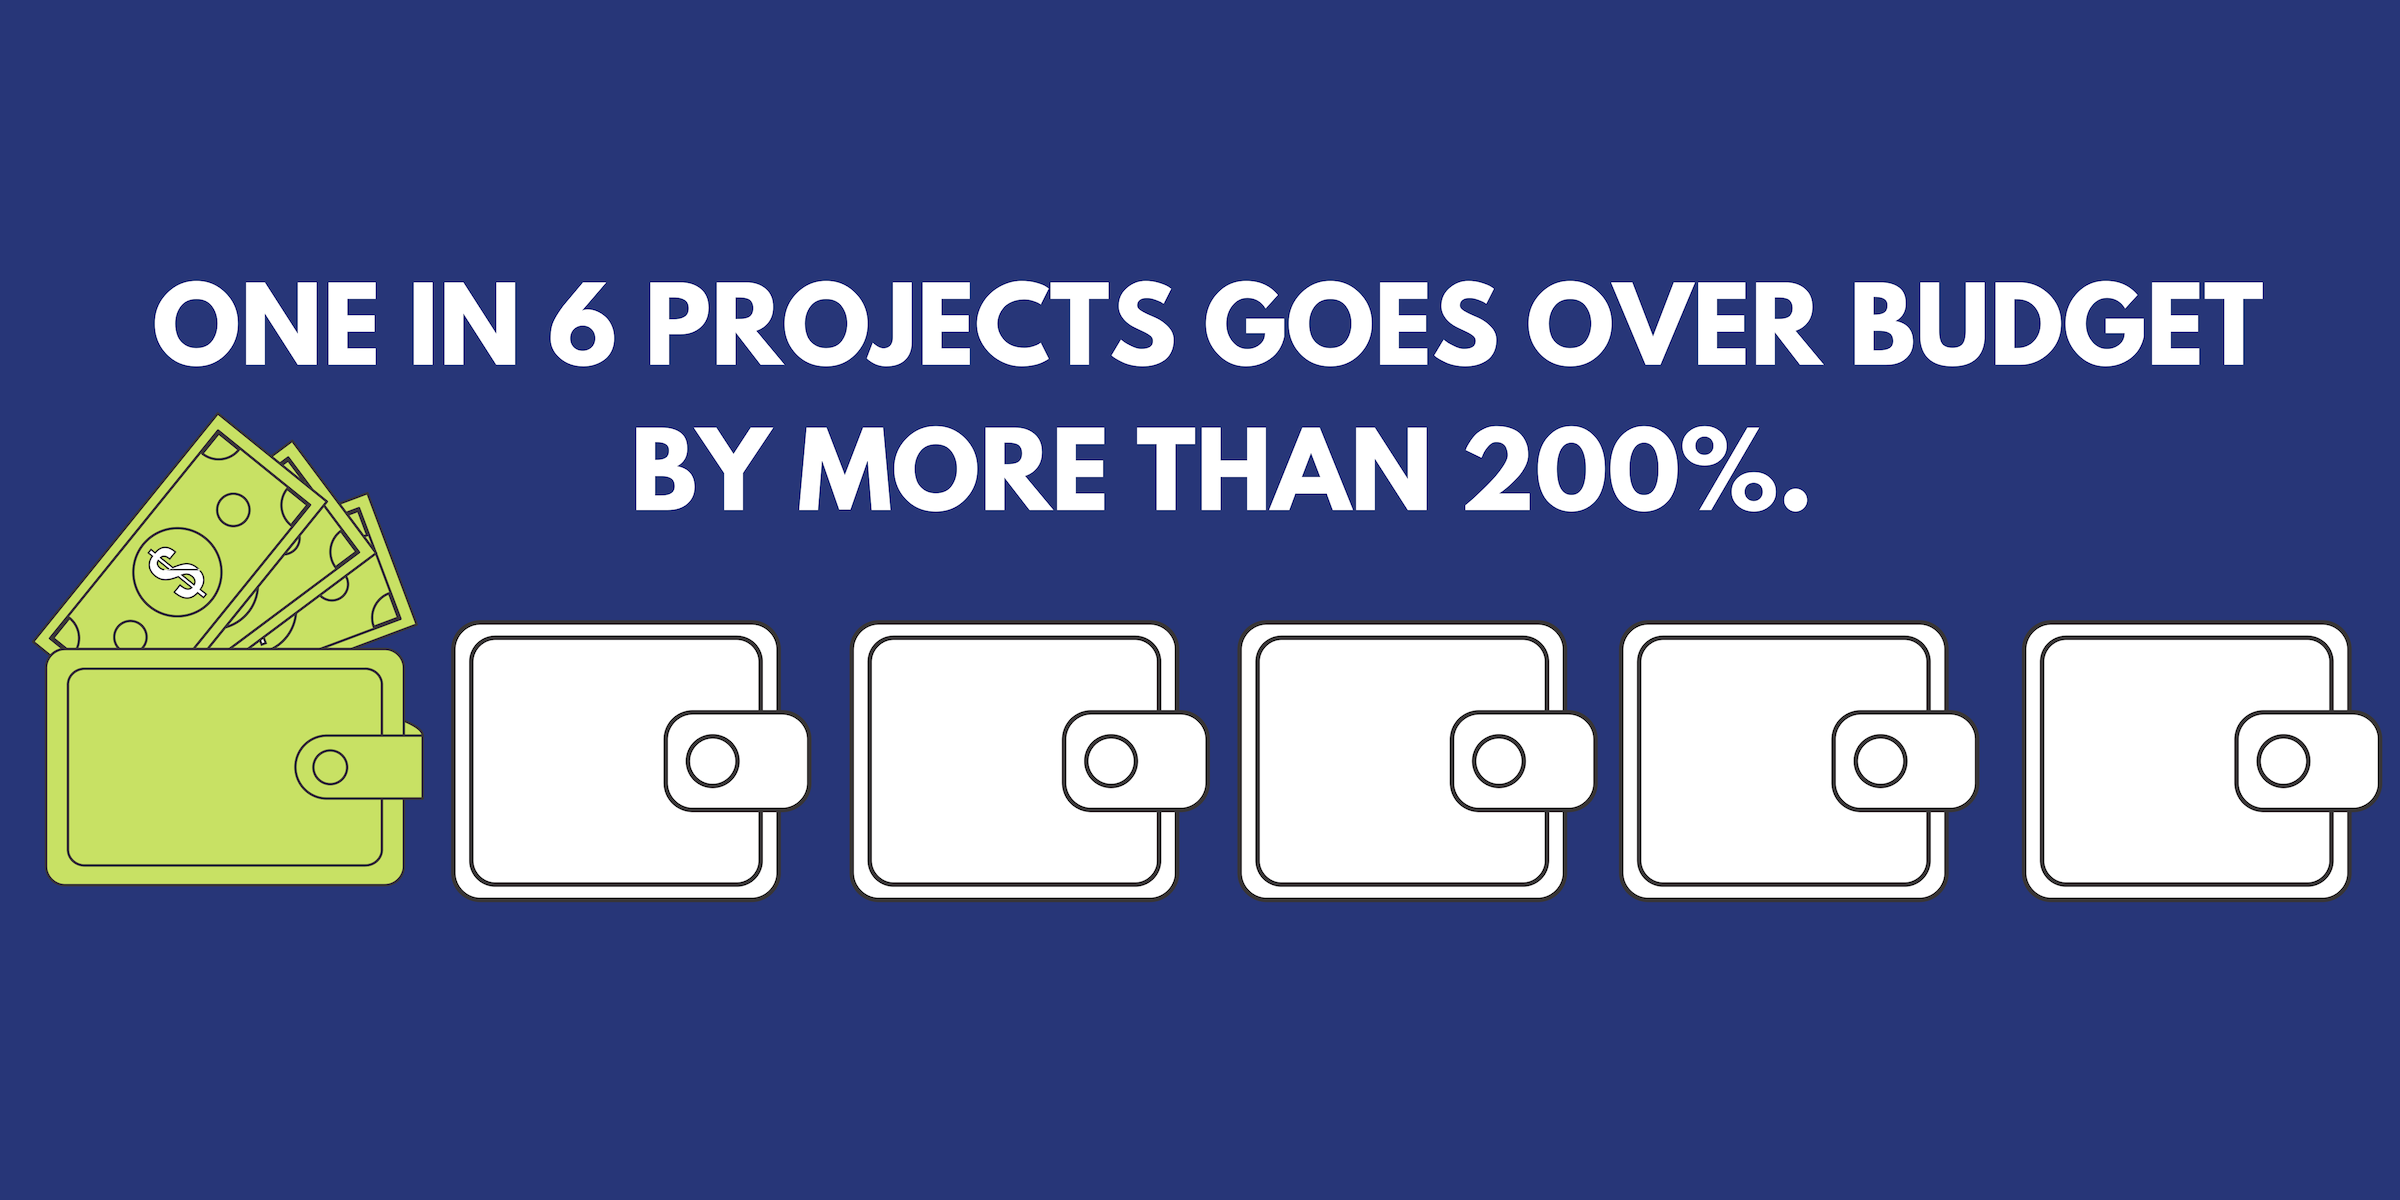 One in 6 projects goes over budget by more than 200%